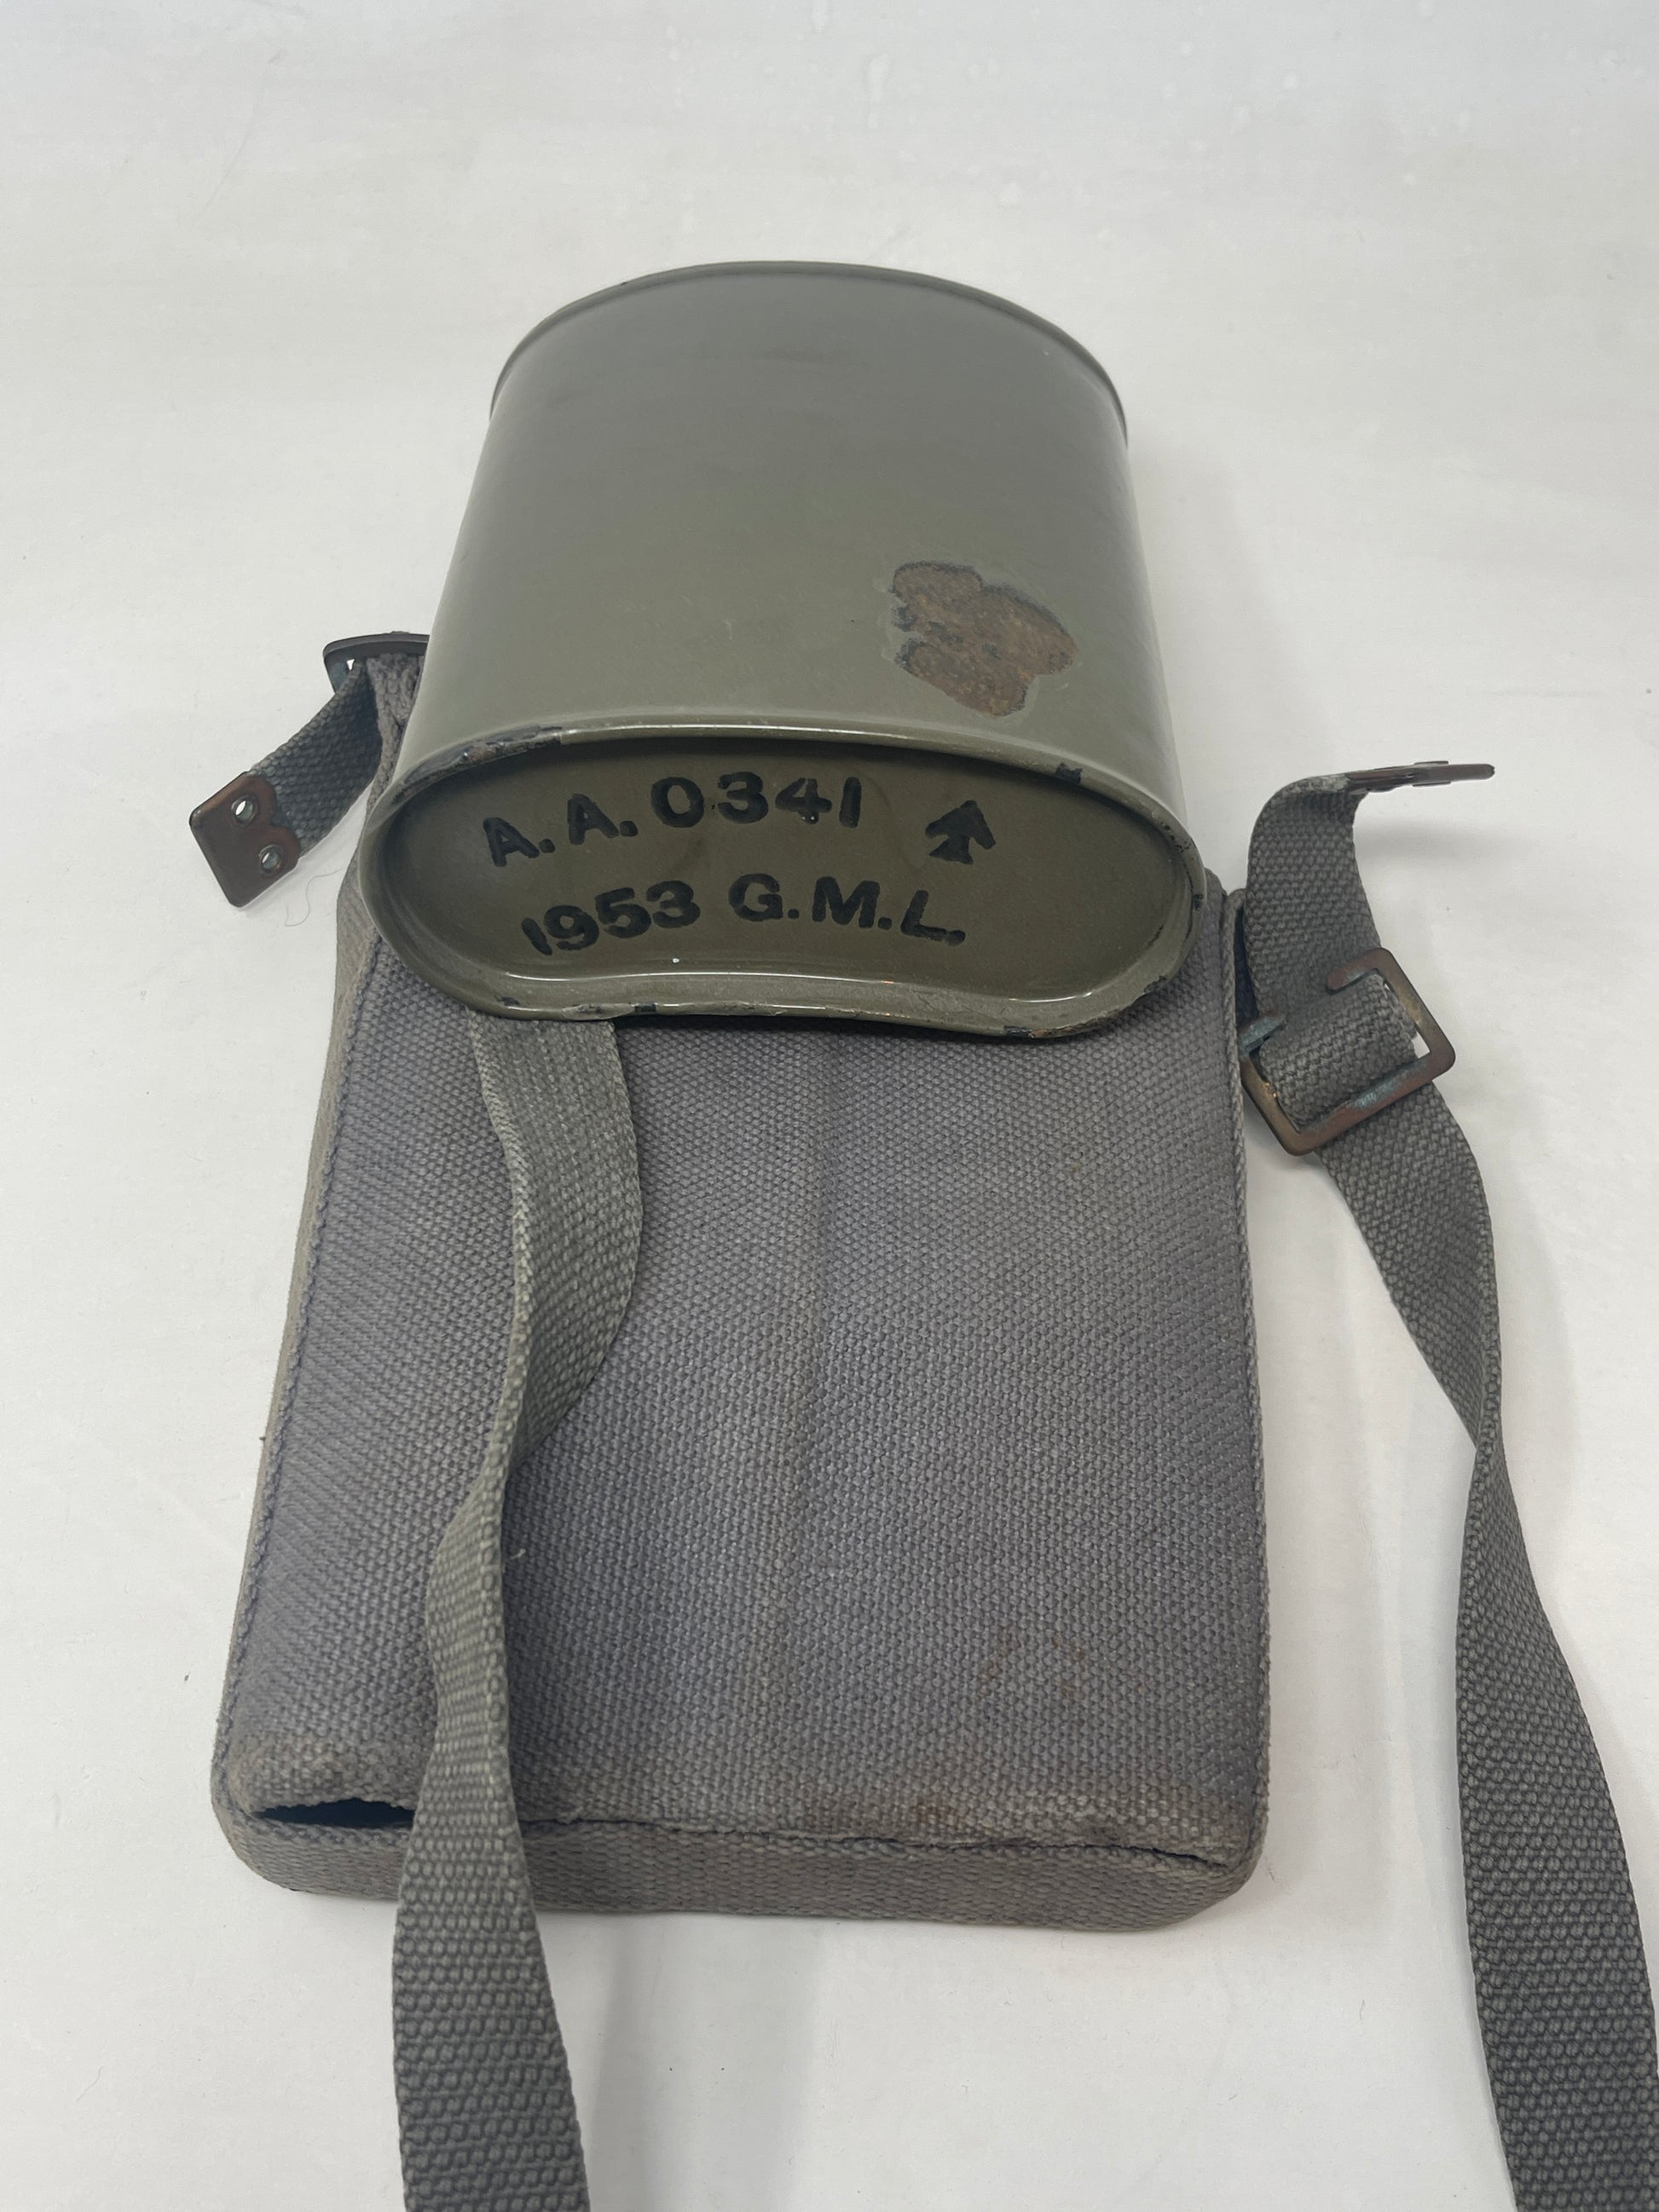  British Royal Air Force Water Bottle w/ '37 Pattern Webbing Cover c.1950